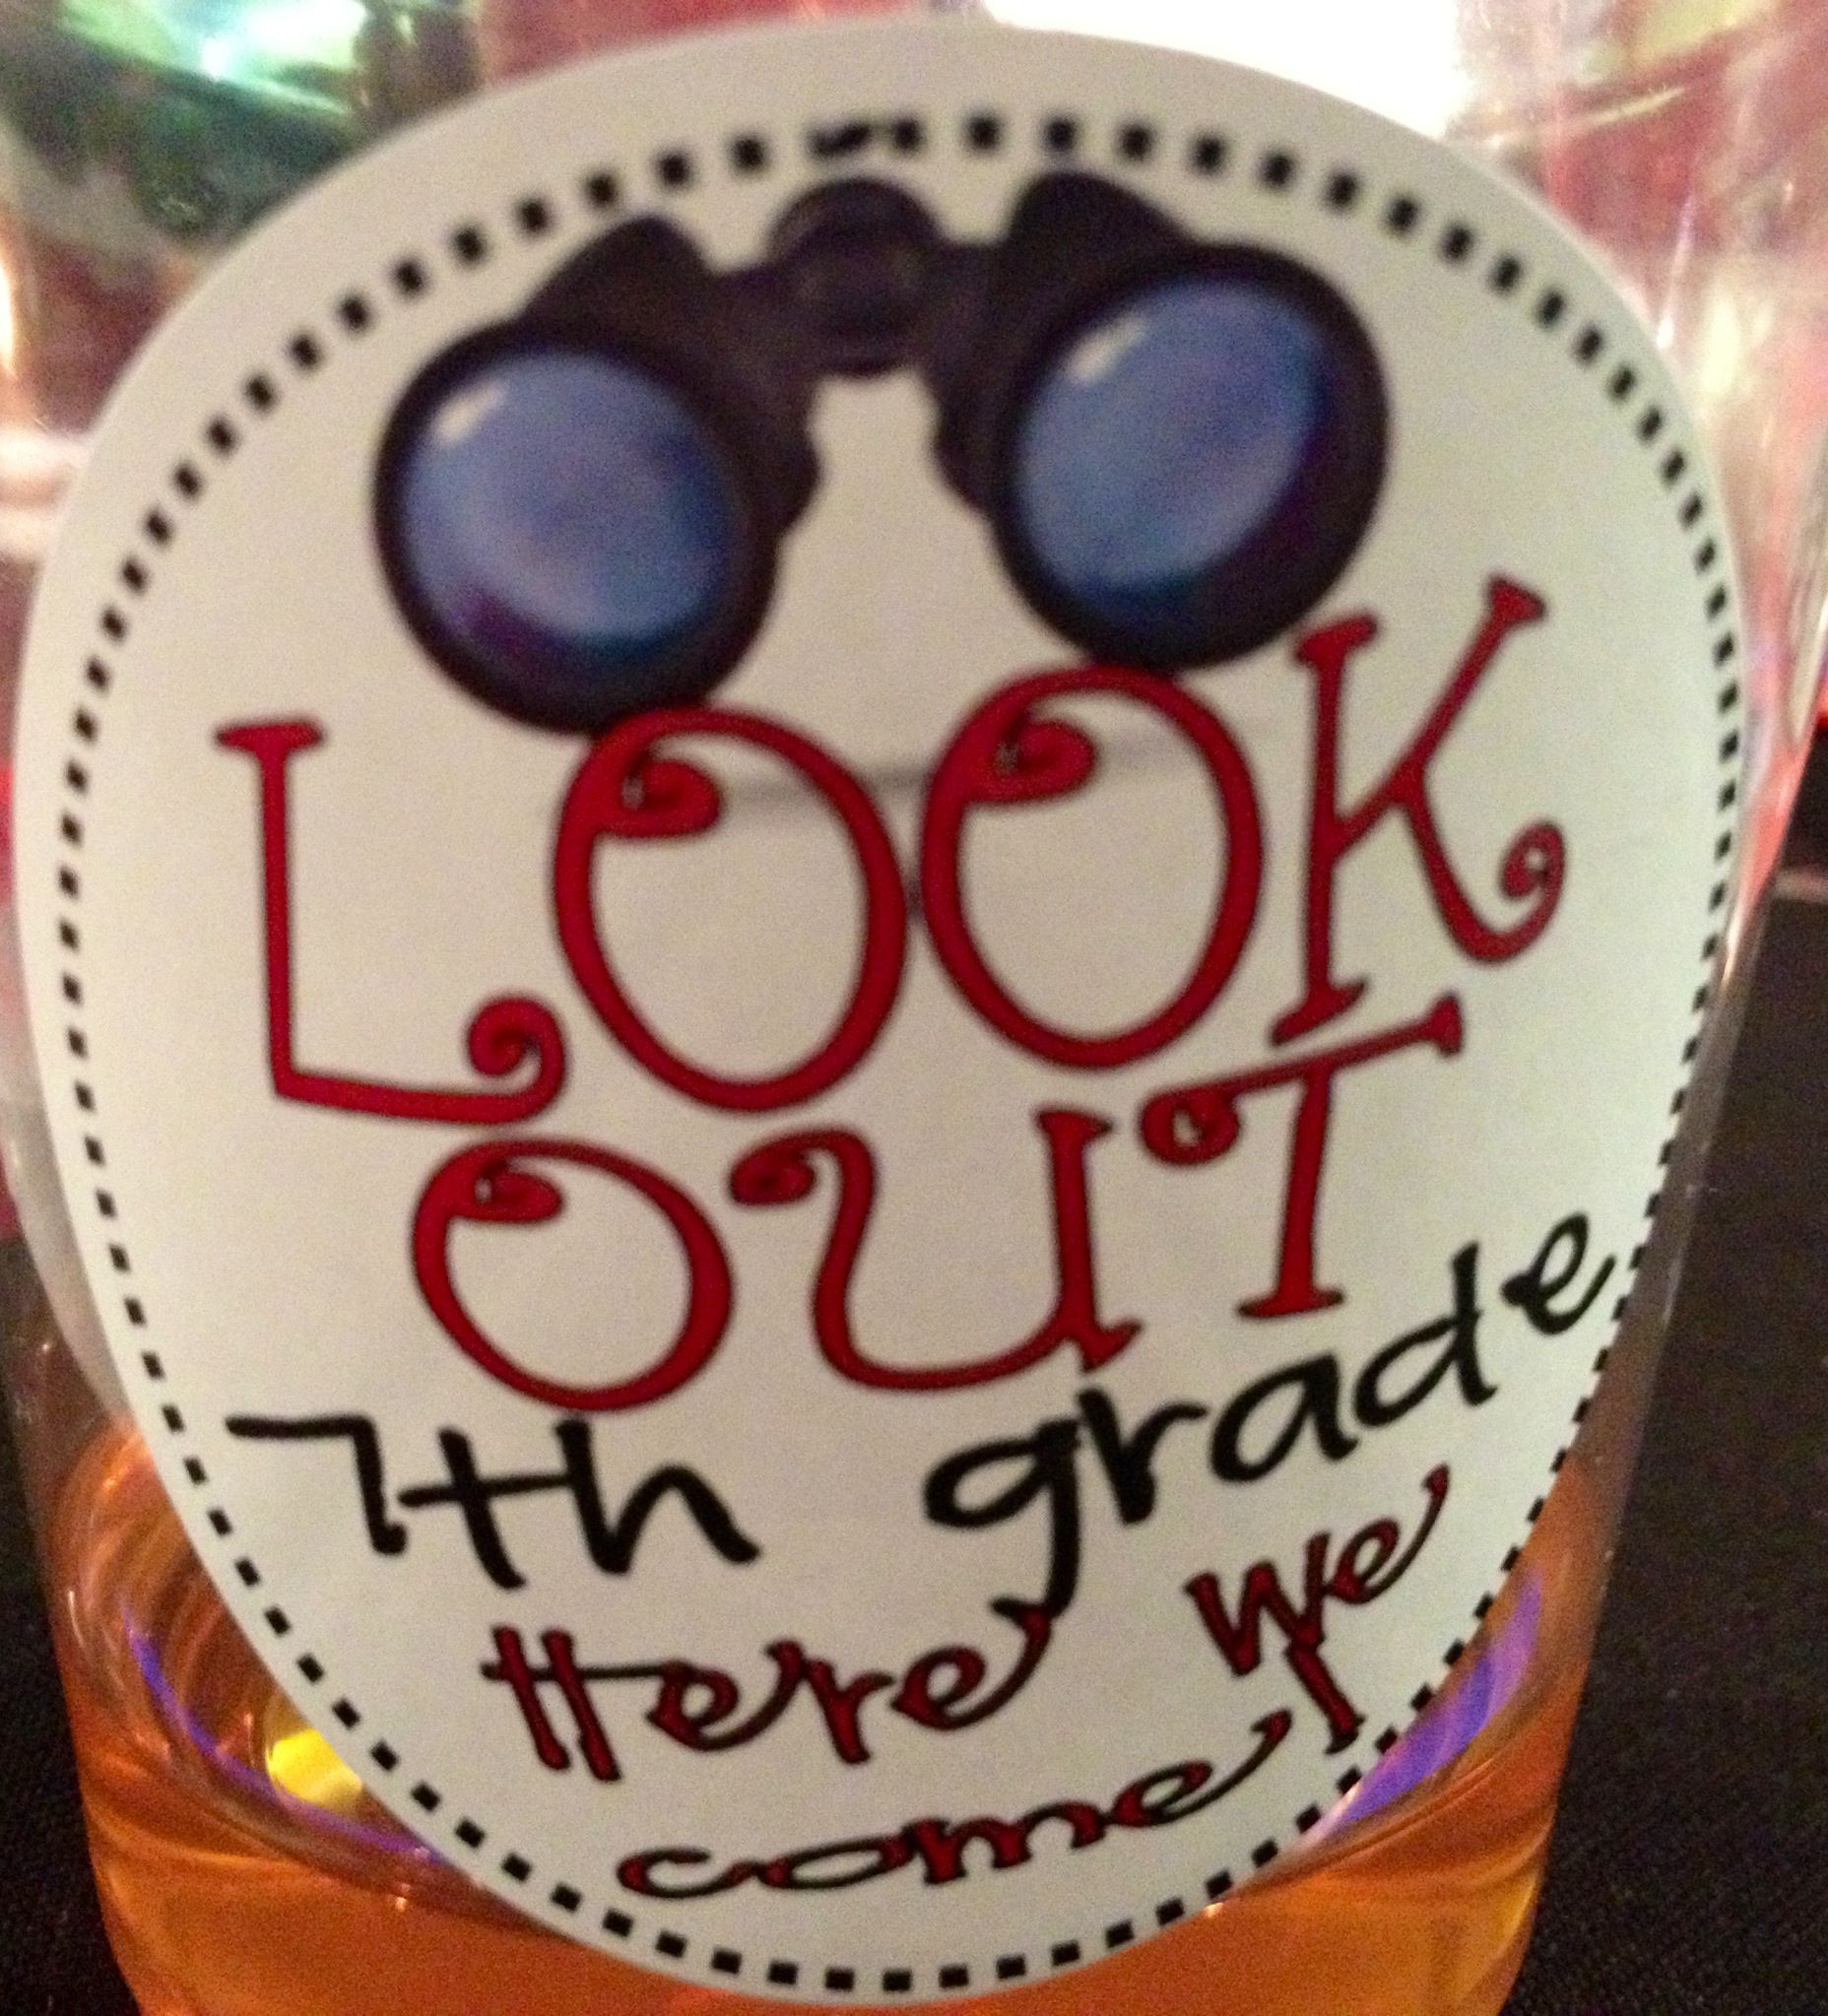 6Th Grade Christmas Party Ideas
 This would be cute for a 6th grade graduation